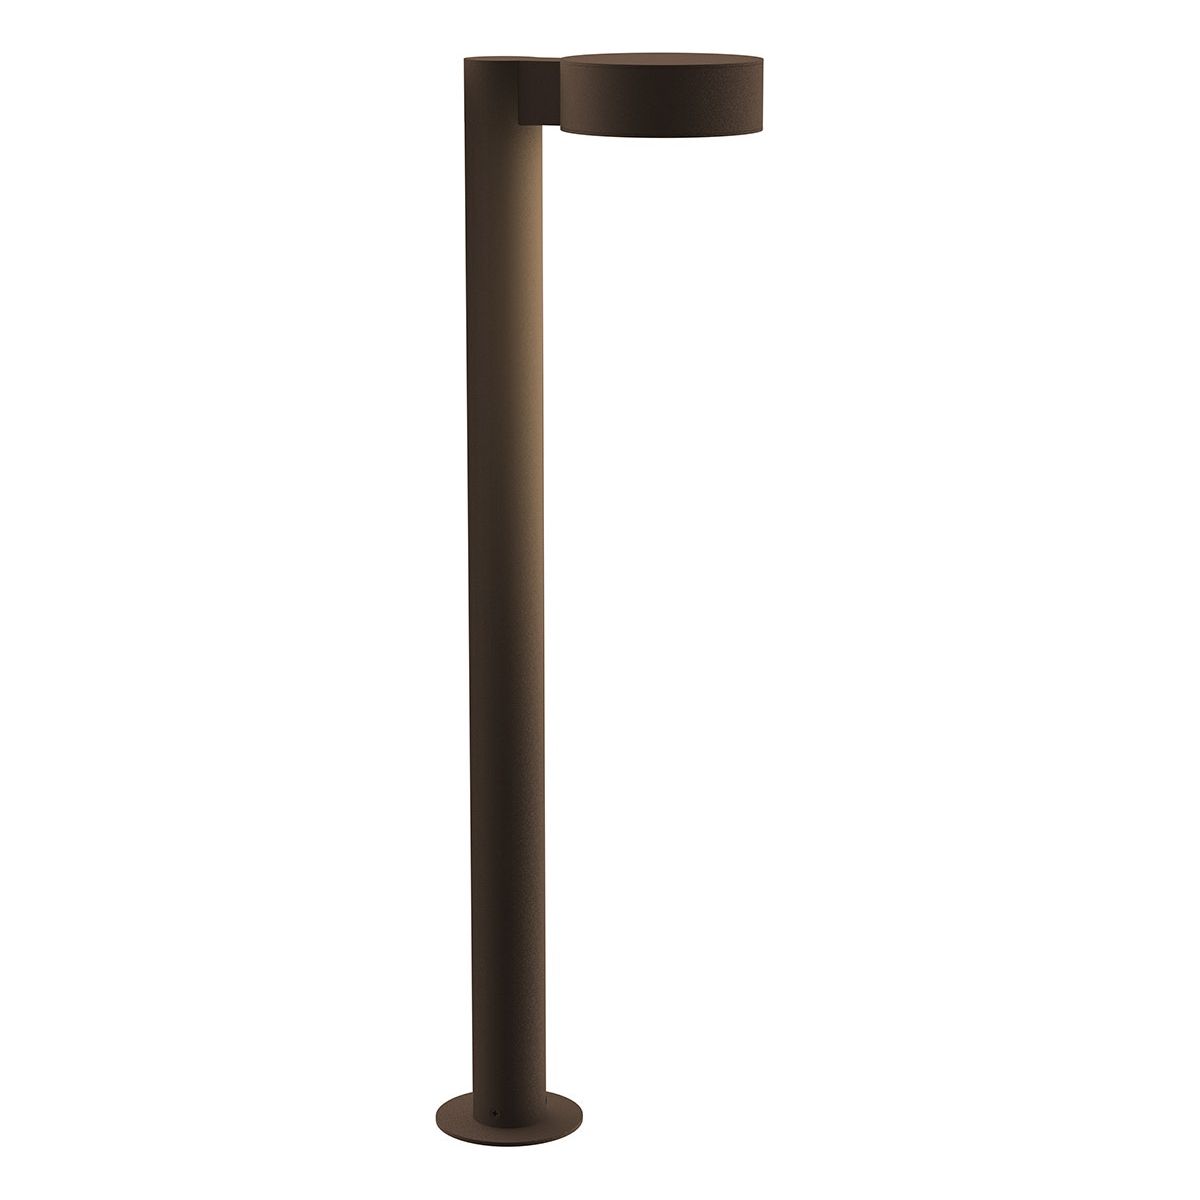 REALS 28" LED Bollard with Plate Cap and Plate Lens